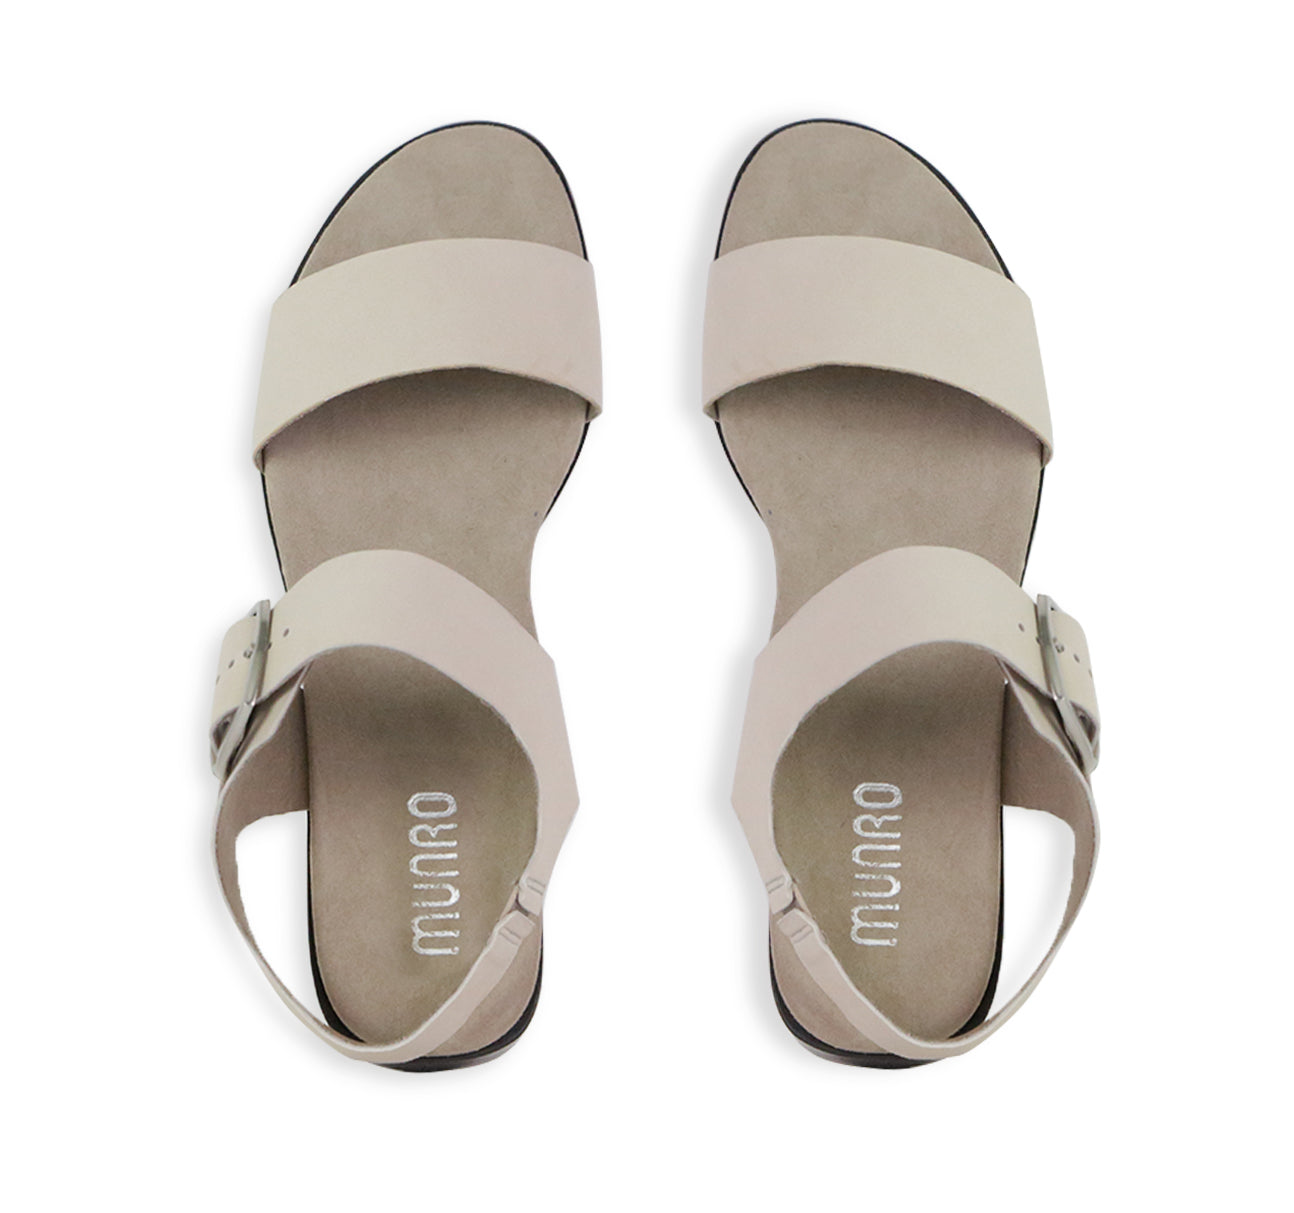 CLEO – Munro Shoes